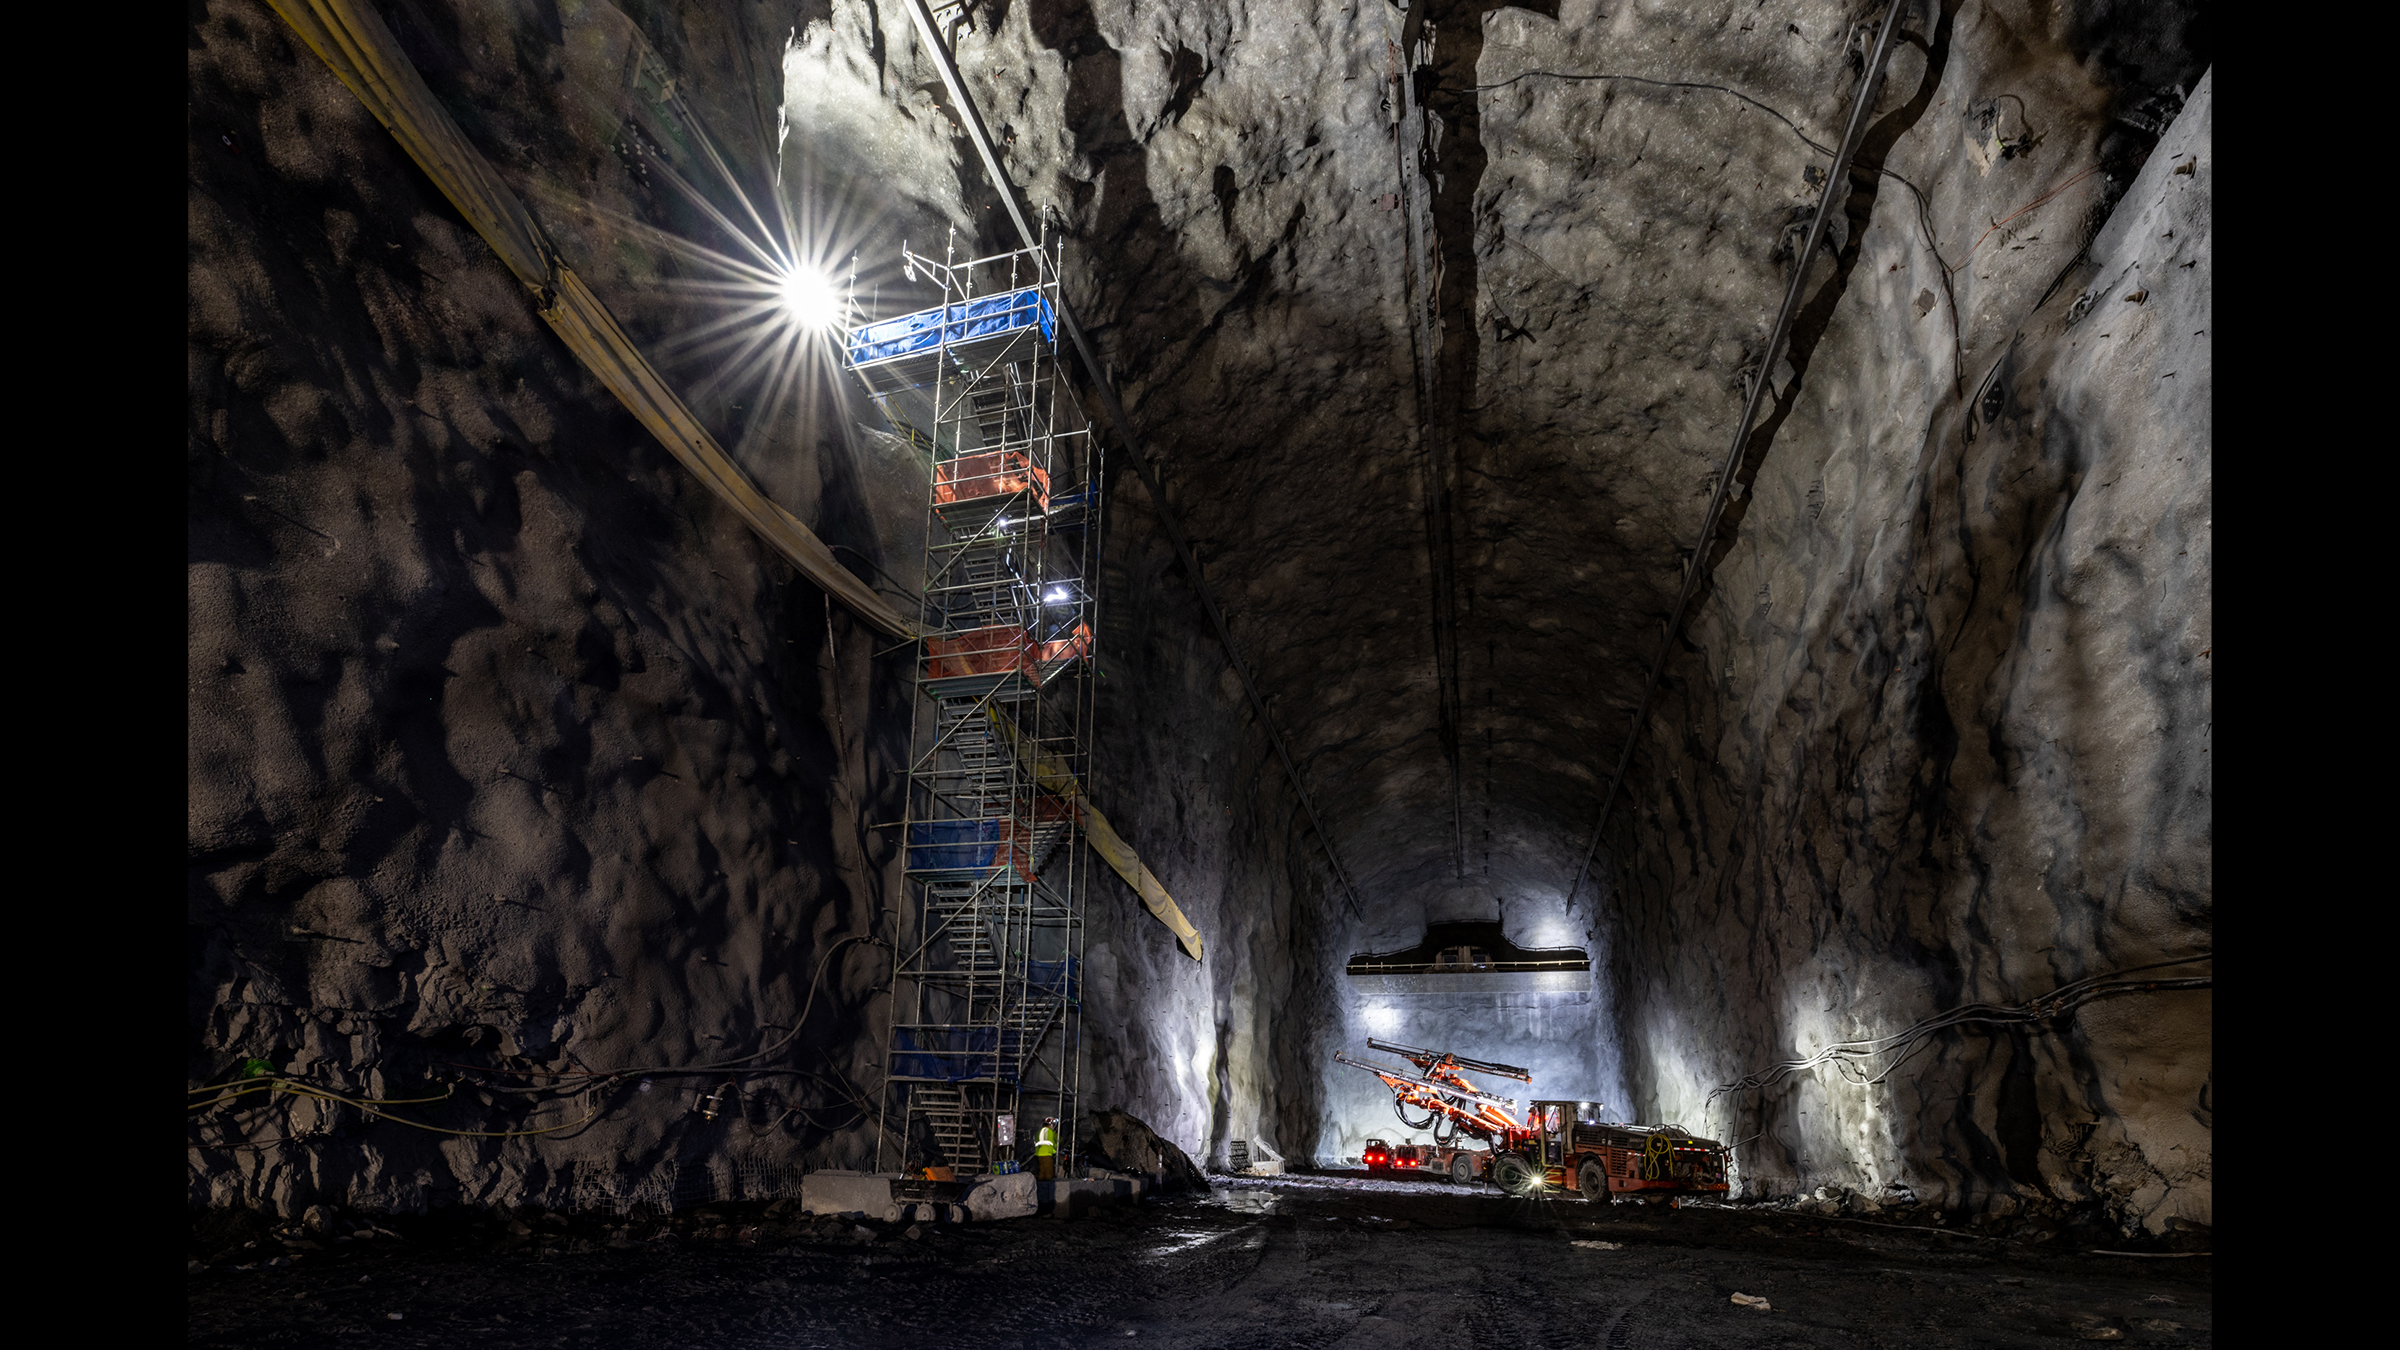 Cranes and other large equipment working in a large cavern